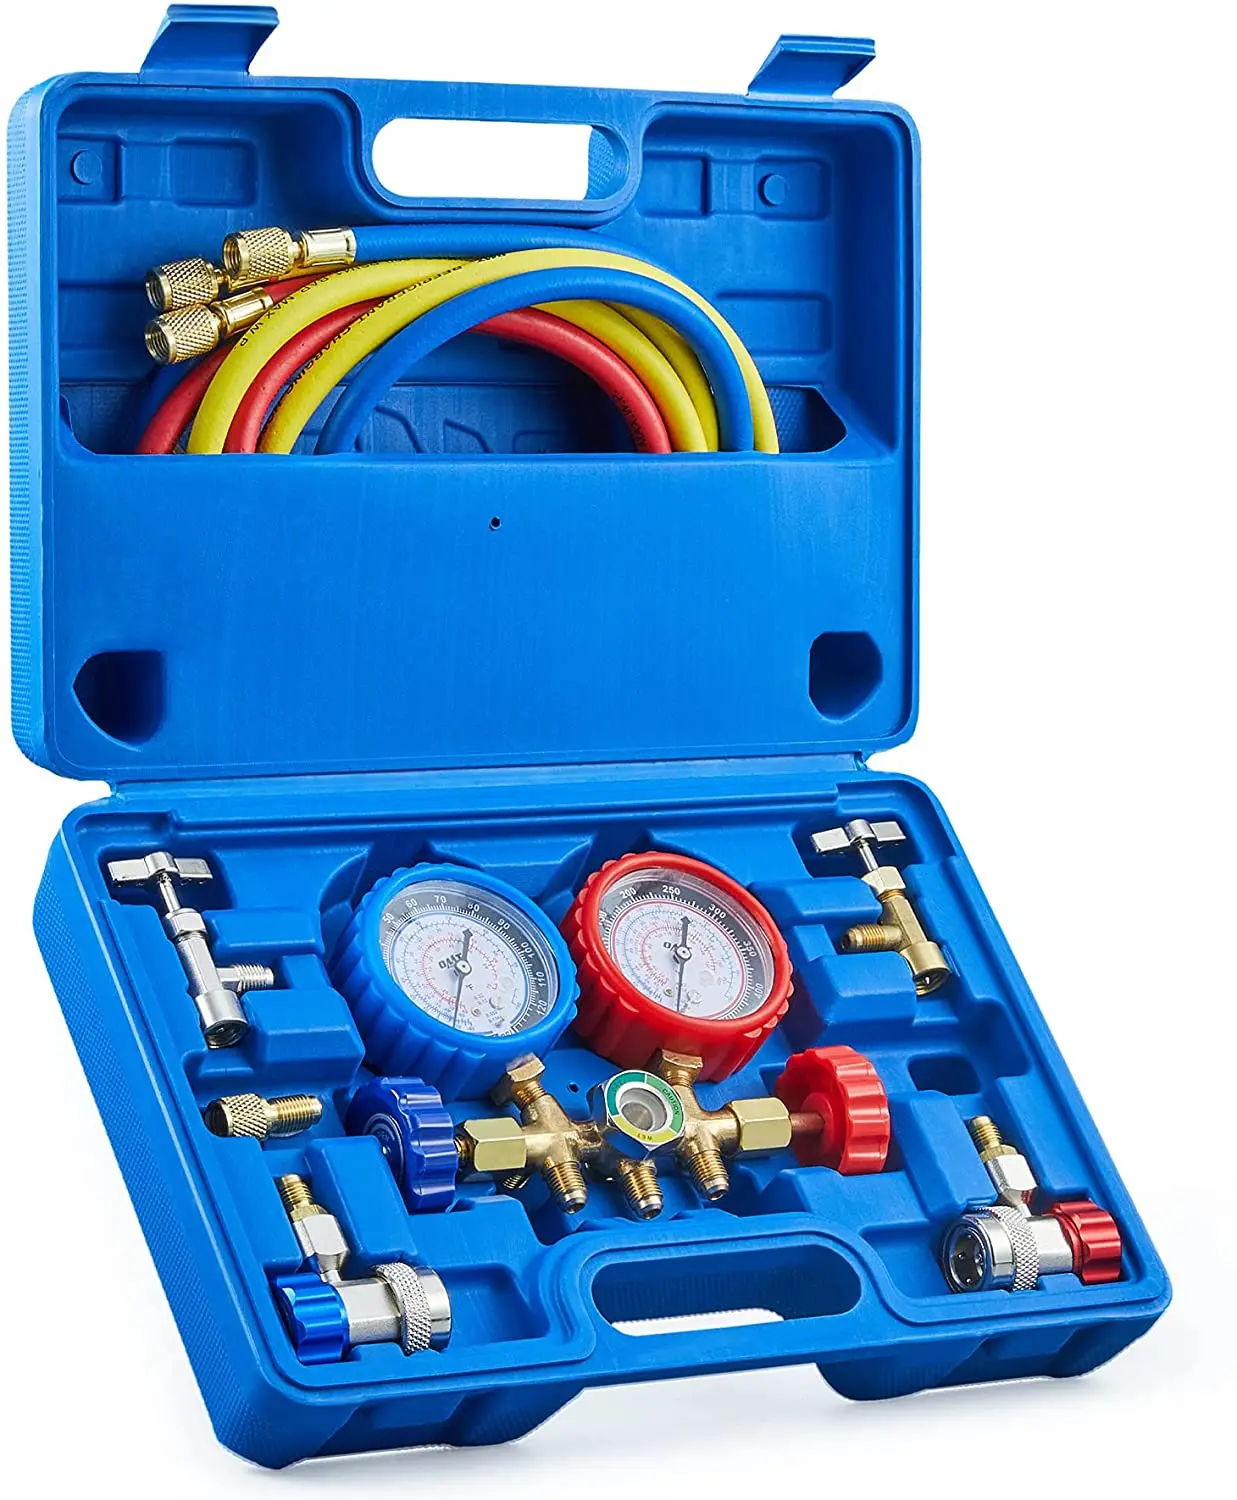 AC Gauges,Manifold Gauge Set for R134a R12 Refrigerant,3 Way Car Set with 5FT Hoses Couplers&Adapter,Sealing Tap Freon Charge